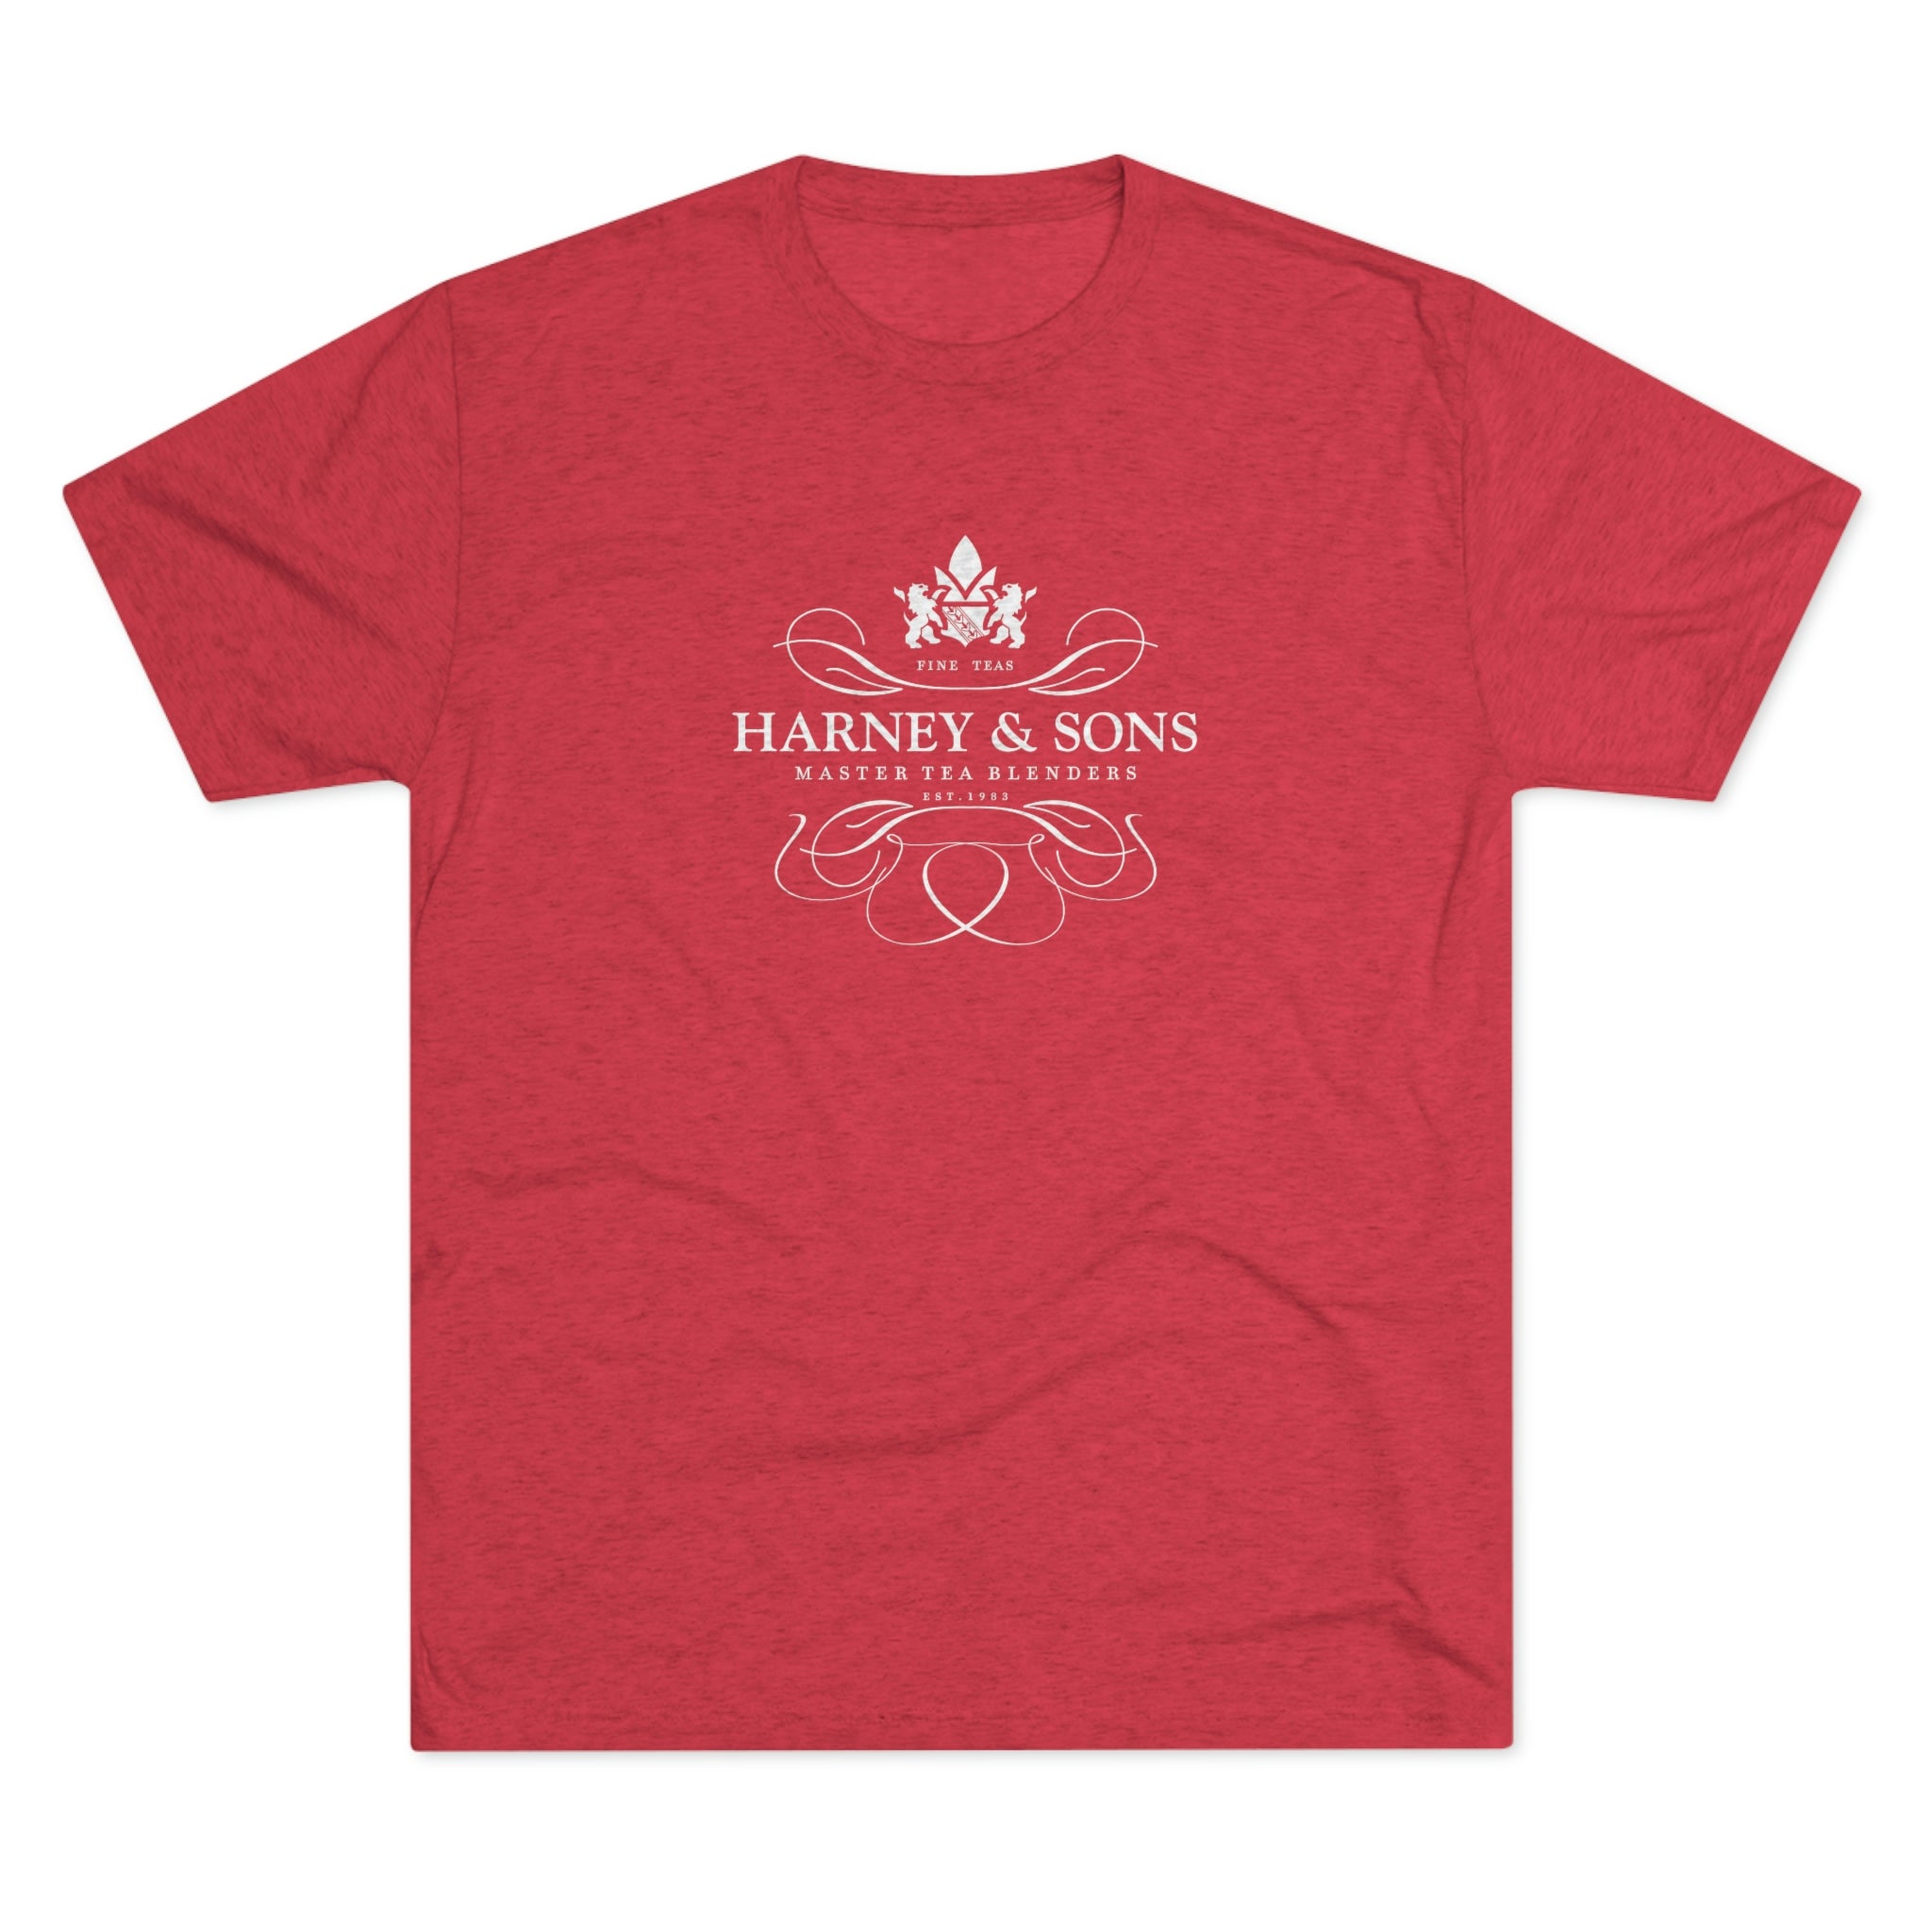 Harney & Sons Logo Graphic Tee - Tri-Blend Vintage Red S - Harney & Sons Fine Teas